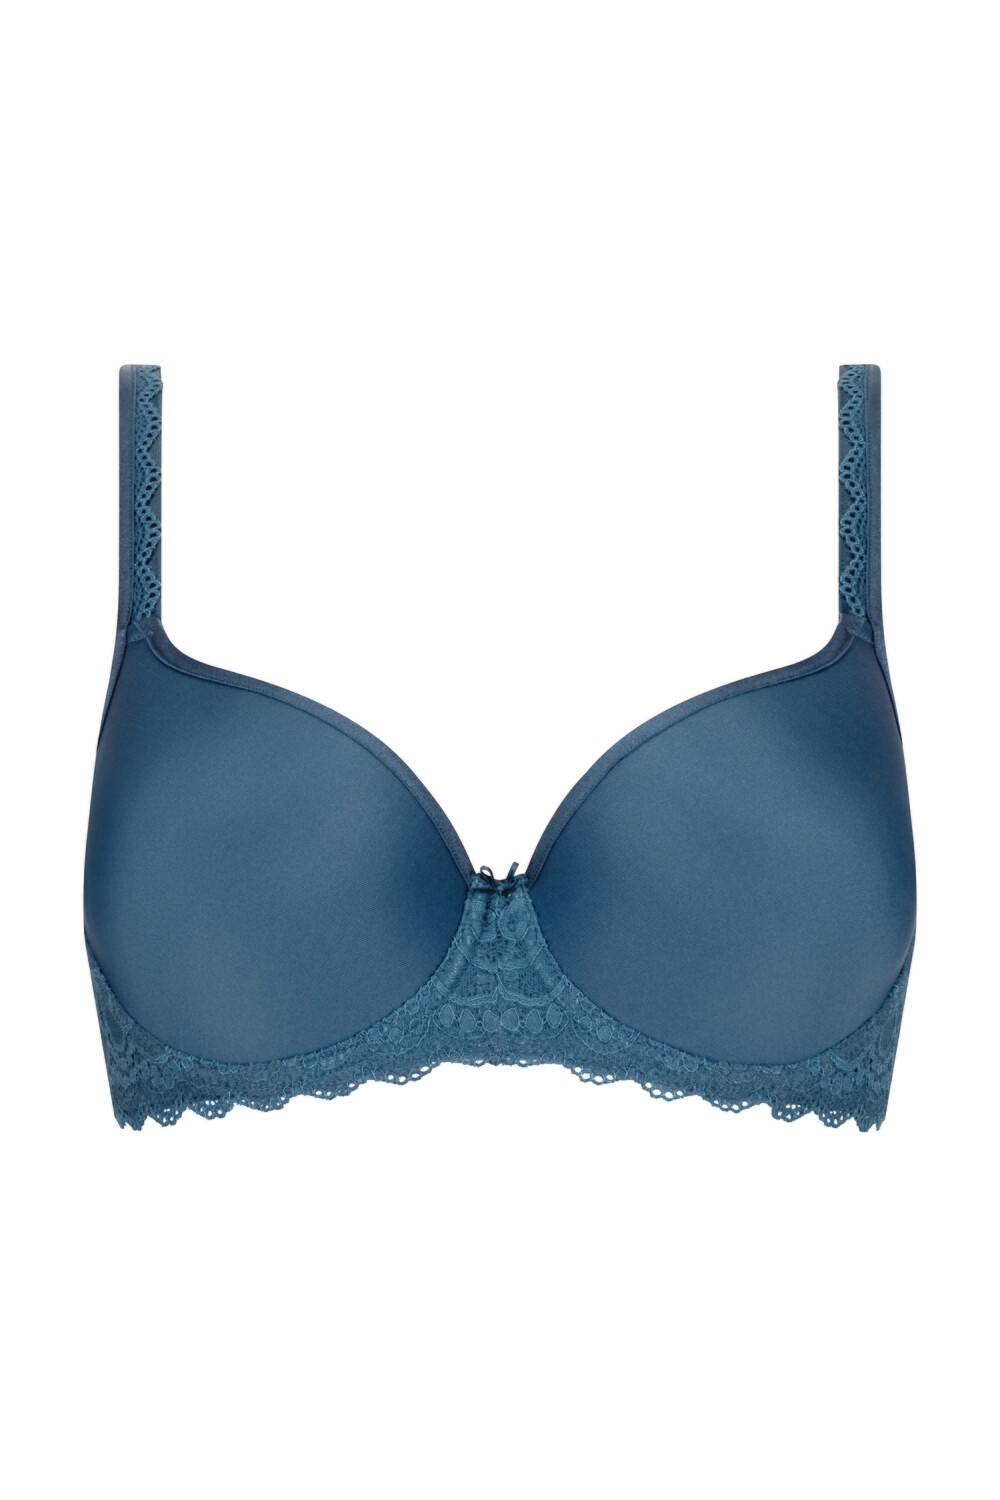 74808 - Mey Amorous Spacer BH Galactic Blue